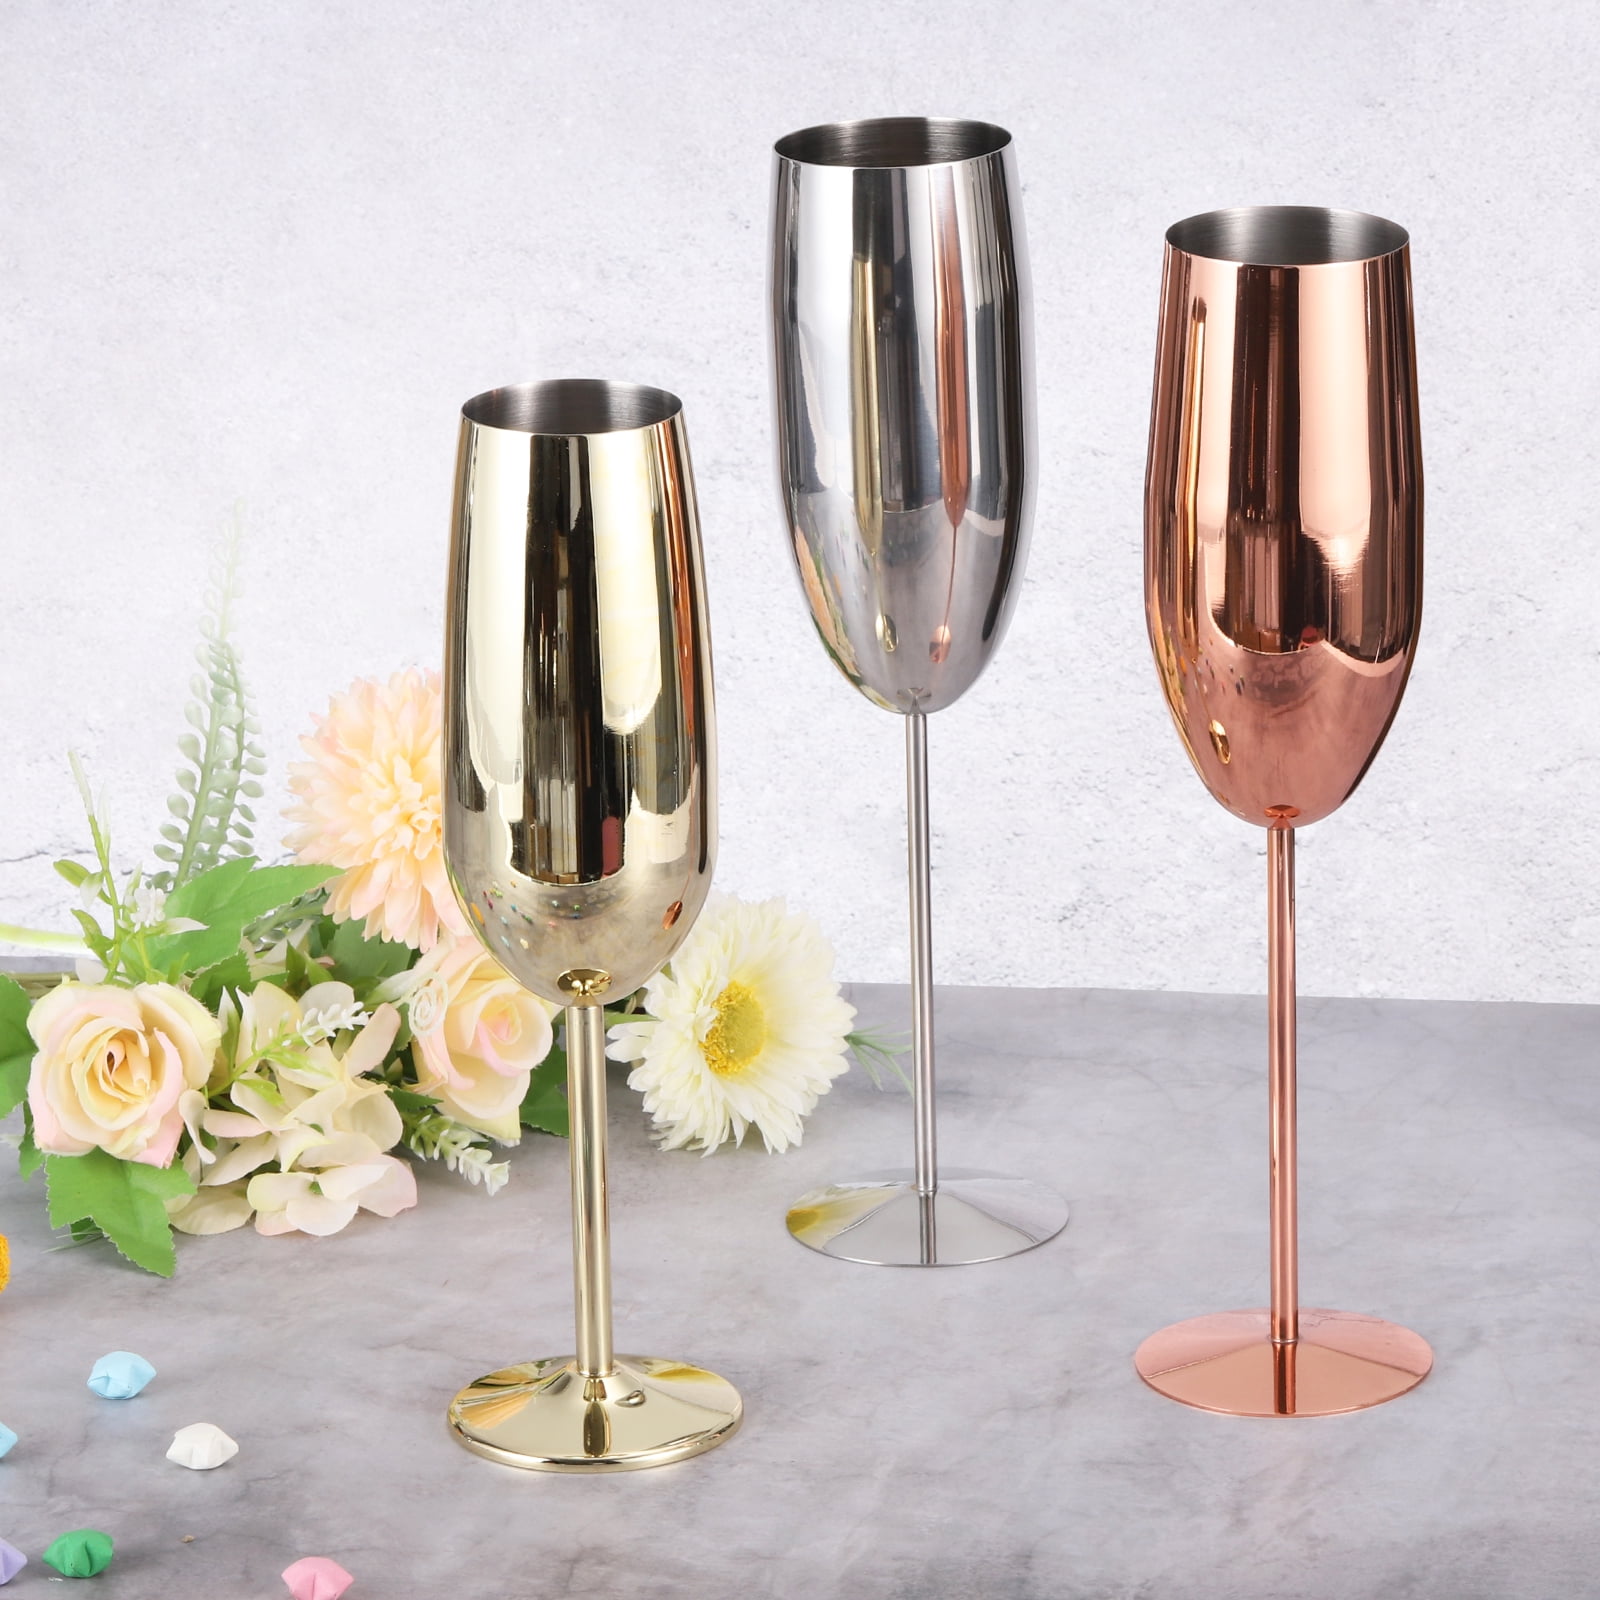 Unbreakable Stemmed Champagne Flutes (Set of 8, 12 oz ea) Shatterproof,  Reusable Indoor Outdoor Glassware - Perfect for Holiday Parties, New Years  Eve & Champag